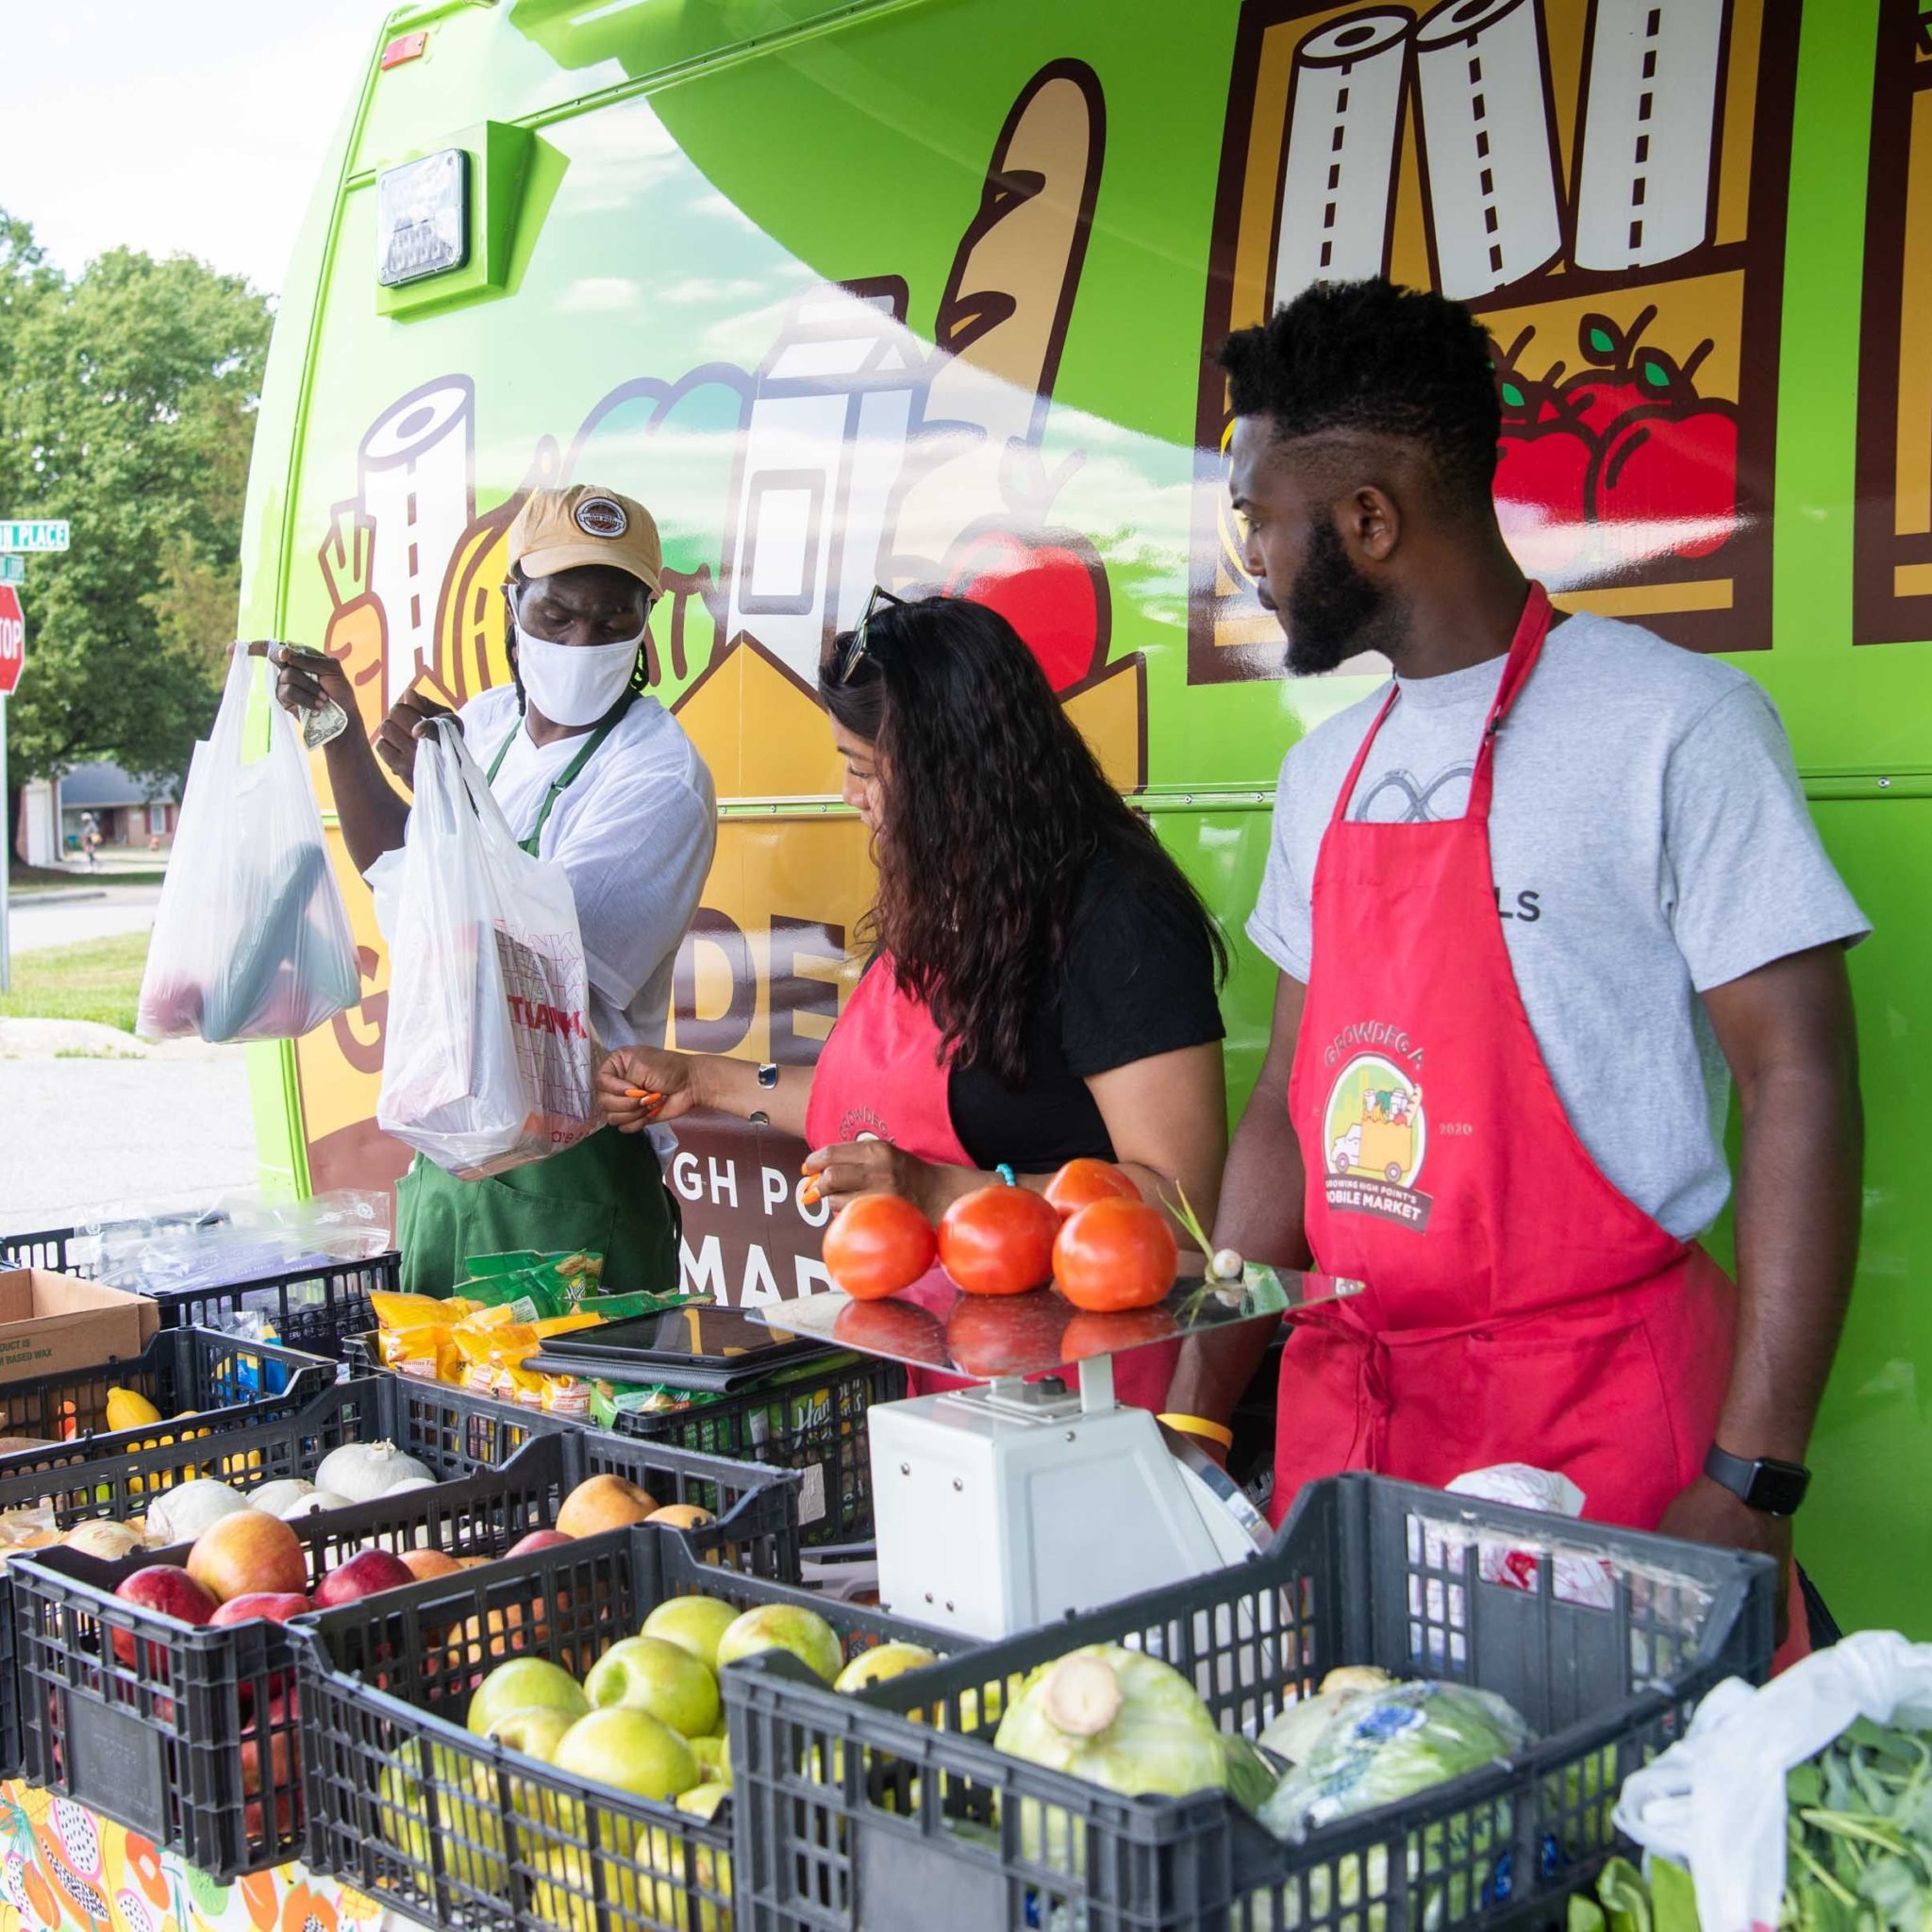 Growdega offers produce to the community.